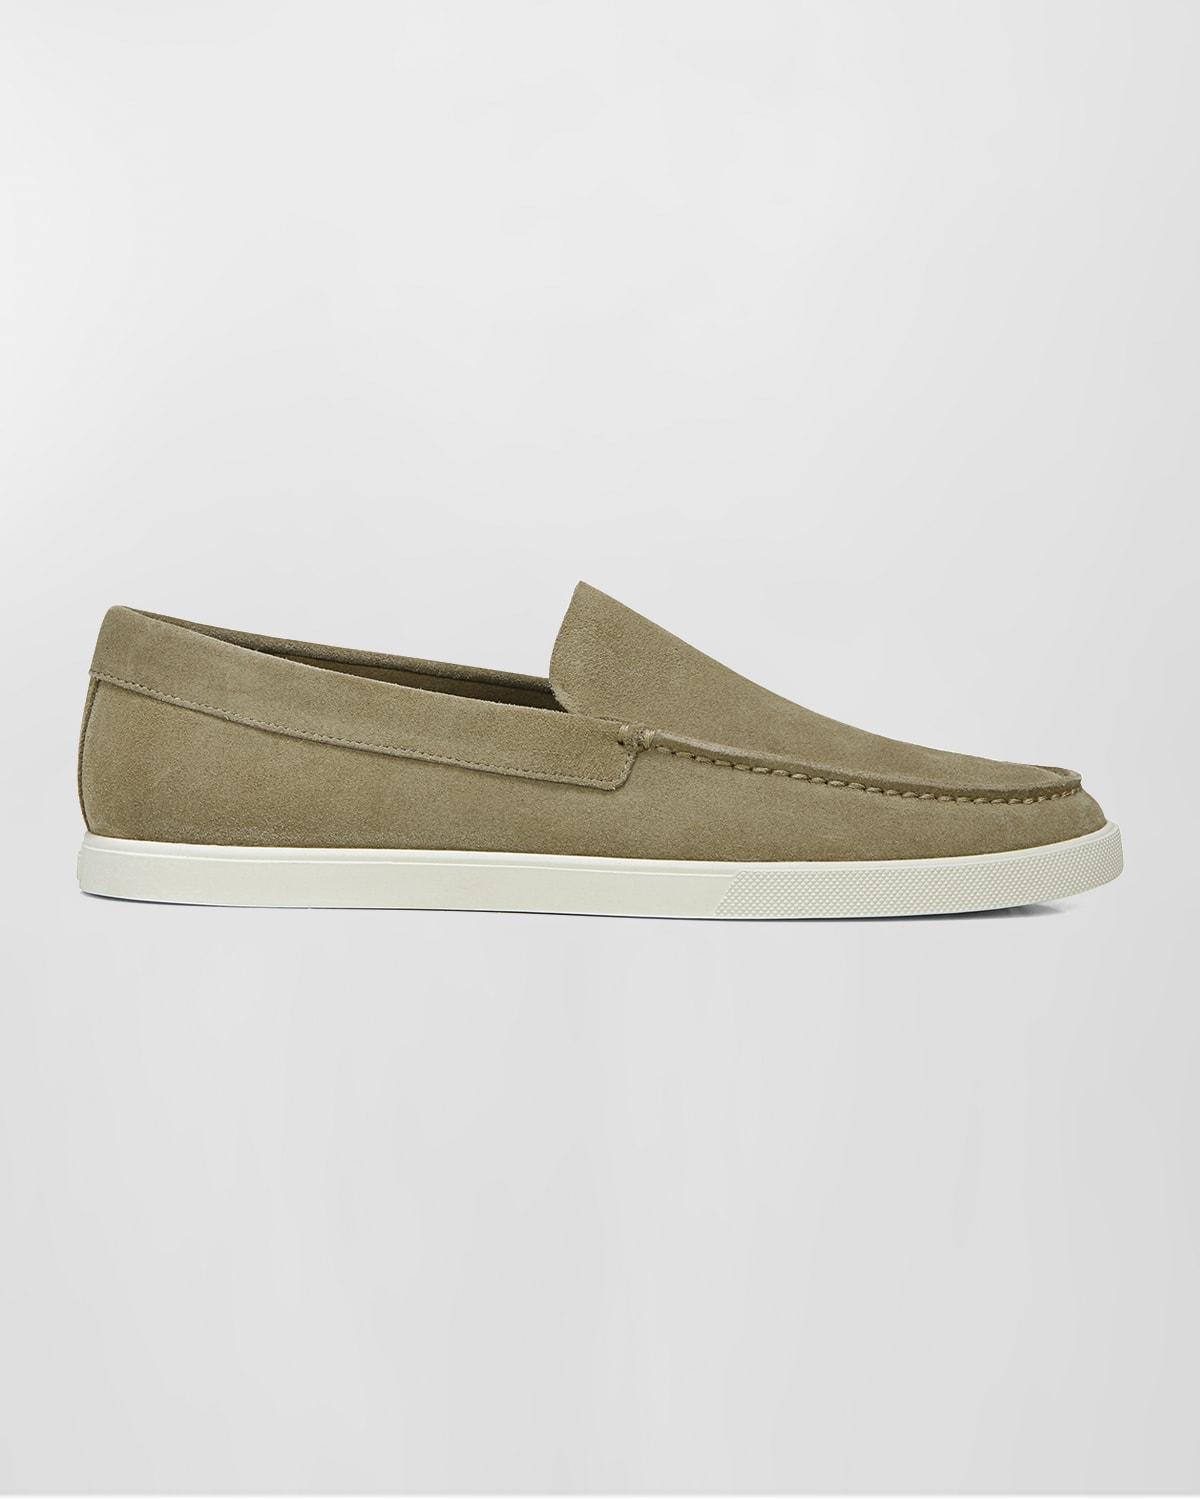 Vince Sonoma Loafer Product Image